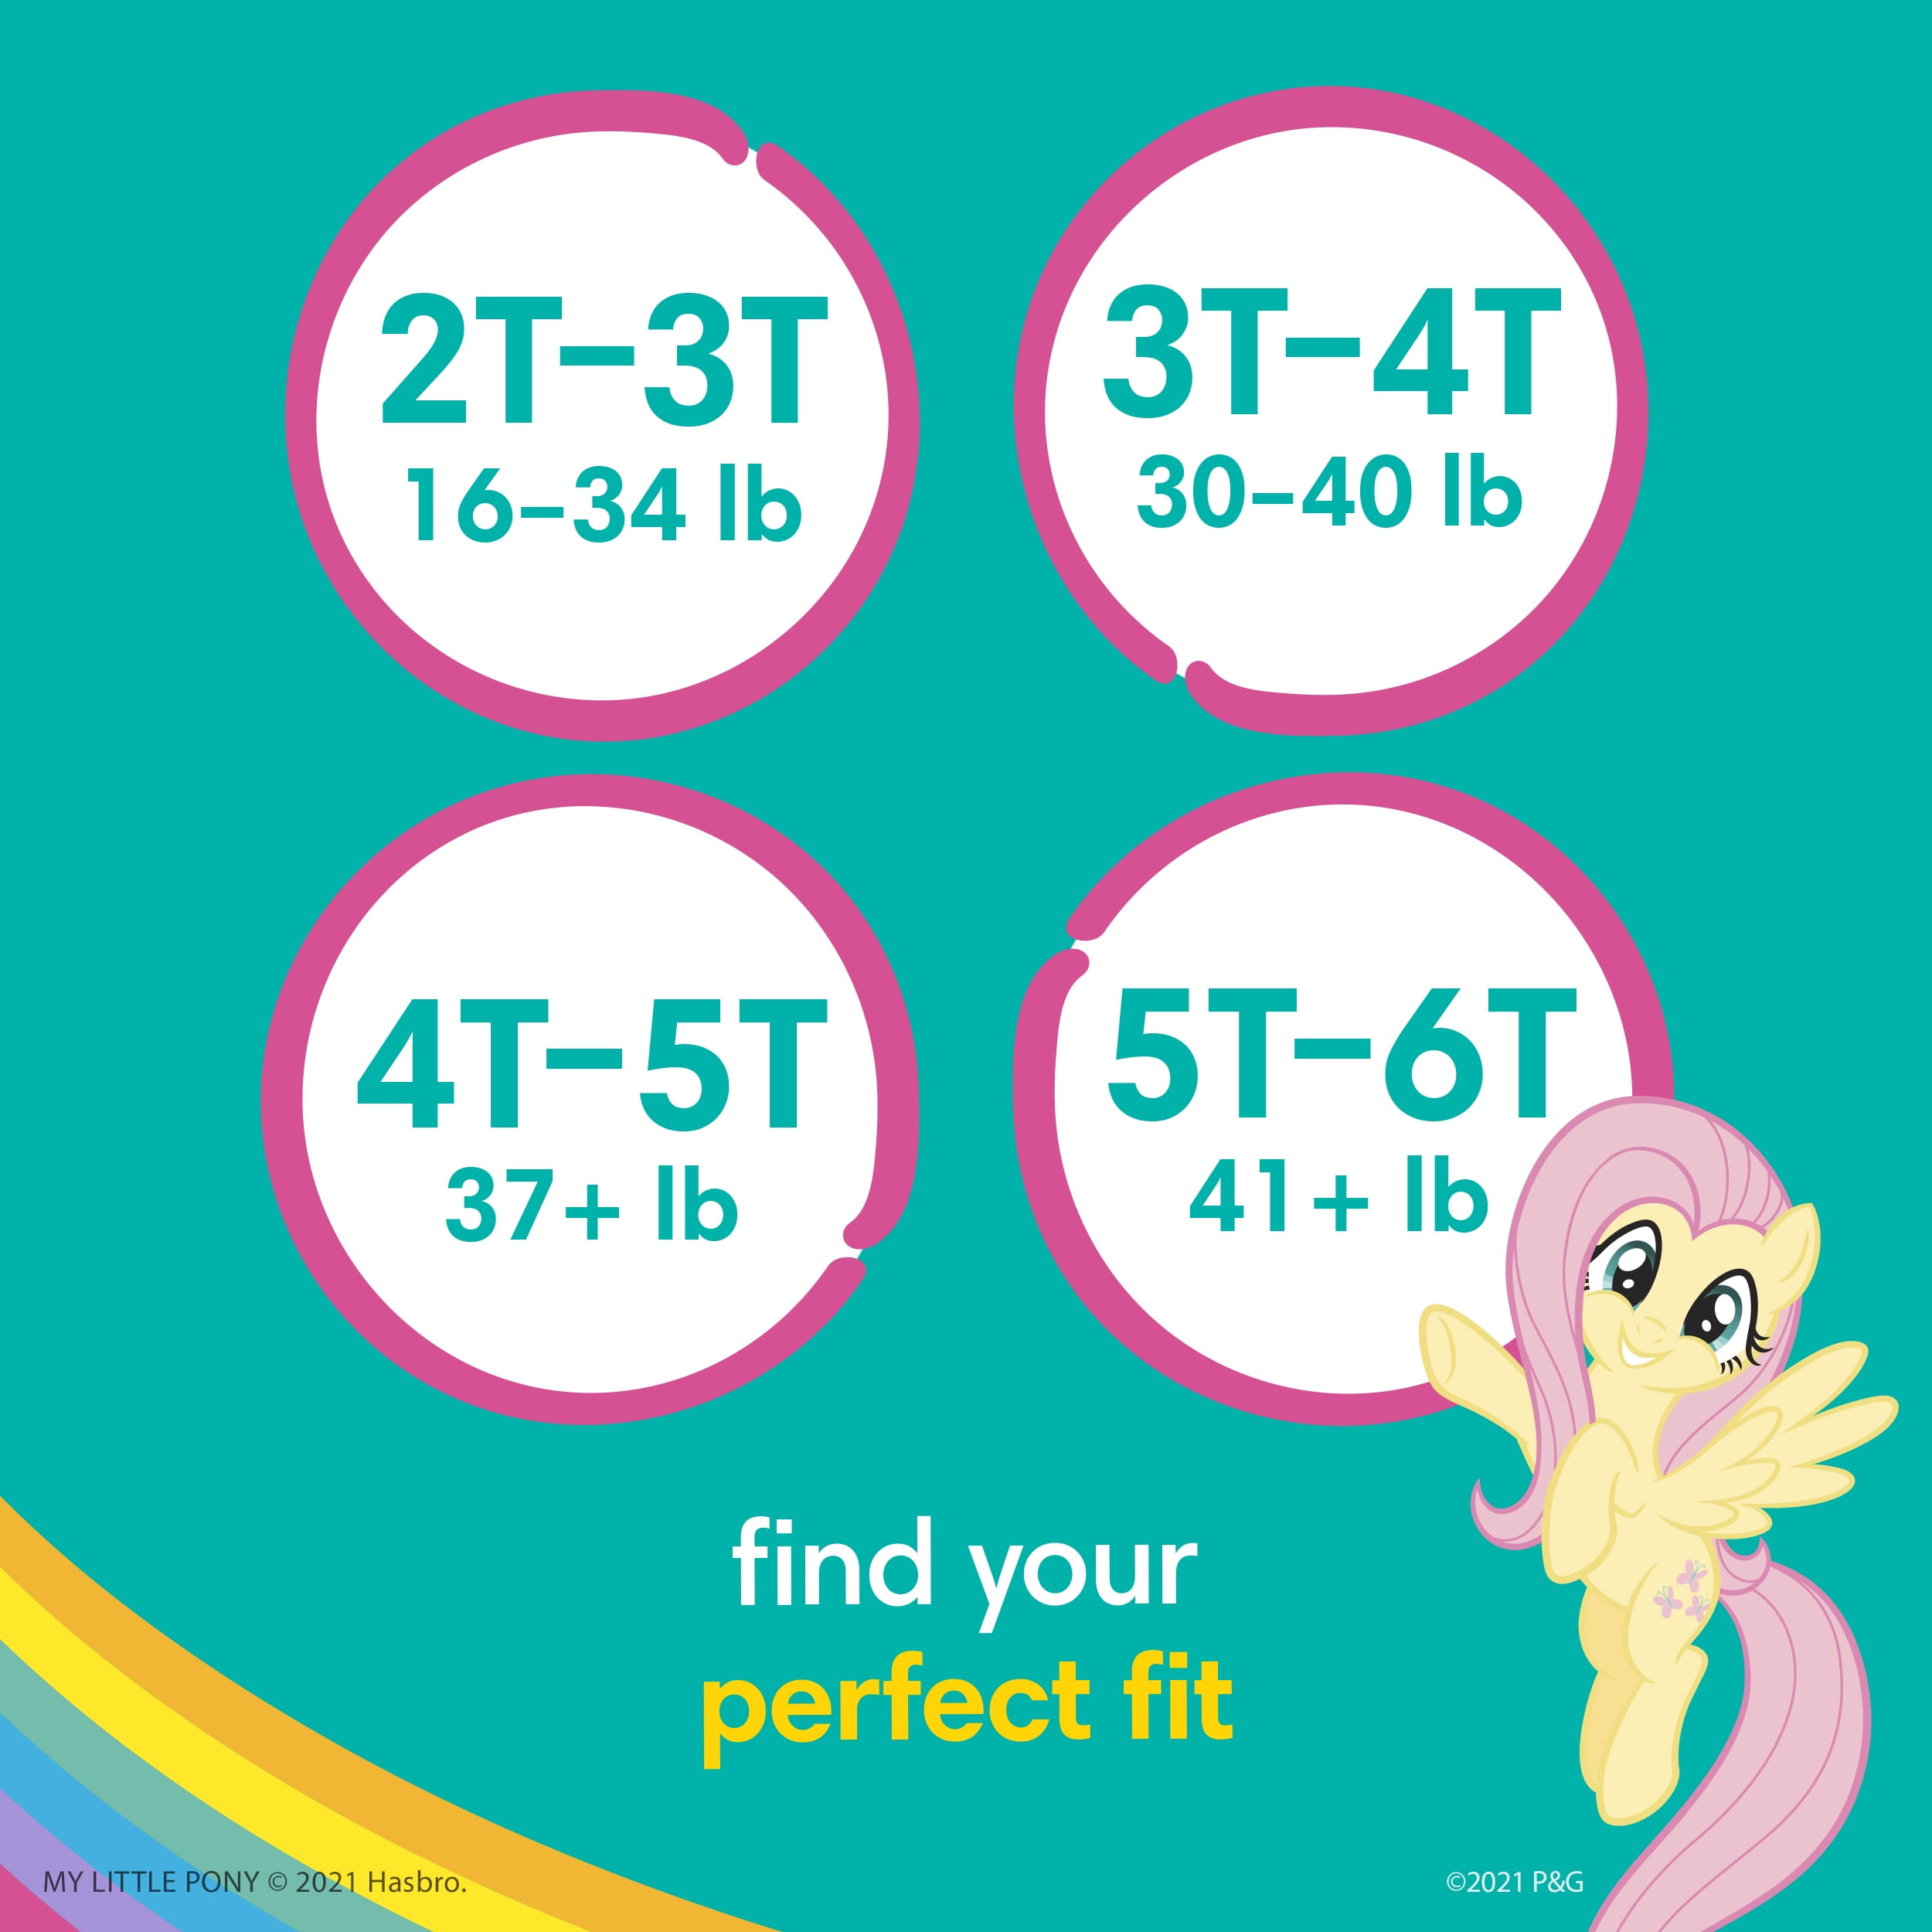  Pampers Easy Ups Girls & Boys Potty Training Pants - Size 2T-3T,  25 Count, My Little Pony Training Underwear : Baby